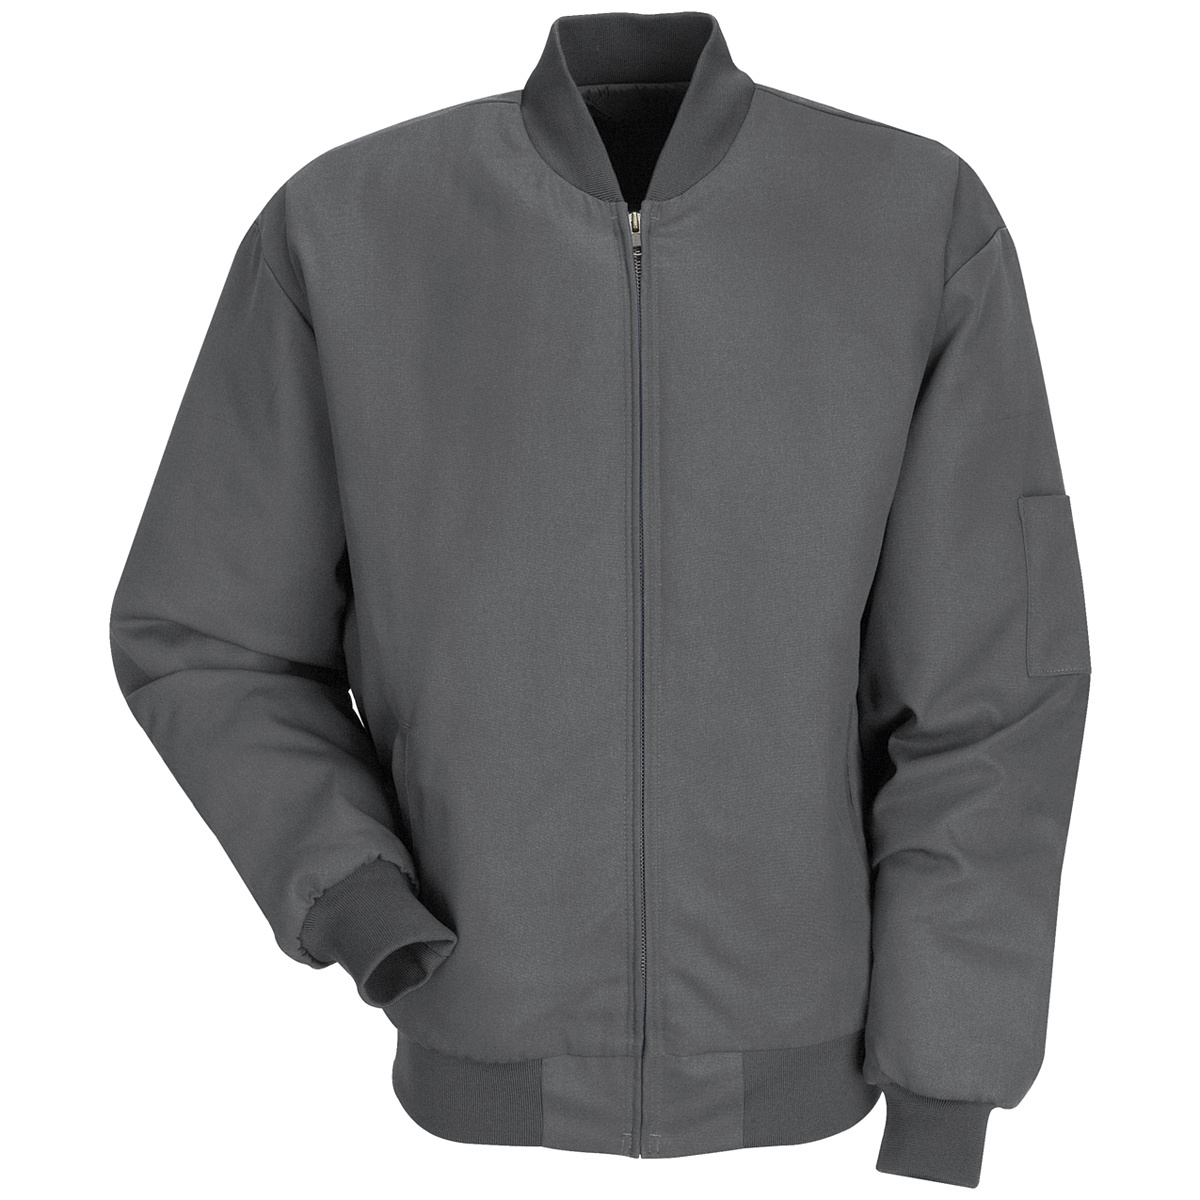 Red Kap X-Large Regular Charcoal Polyester Lined 7.25 Ounce Polyester Cotton Jacket